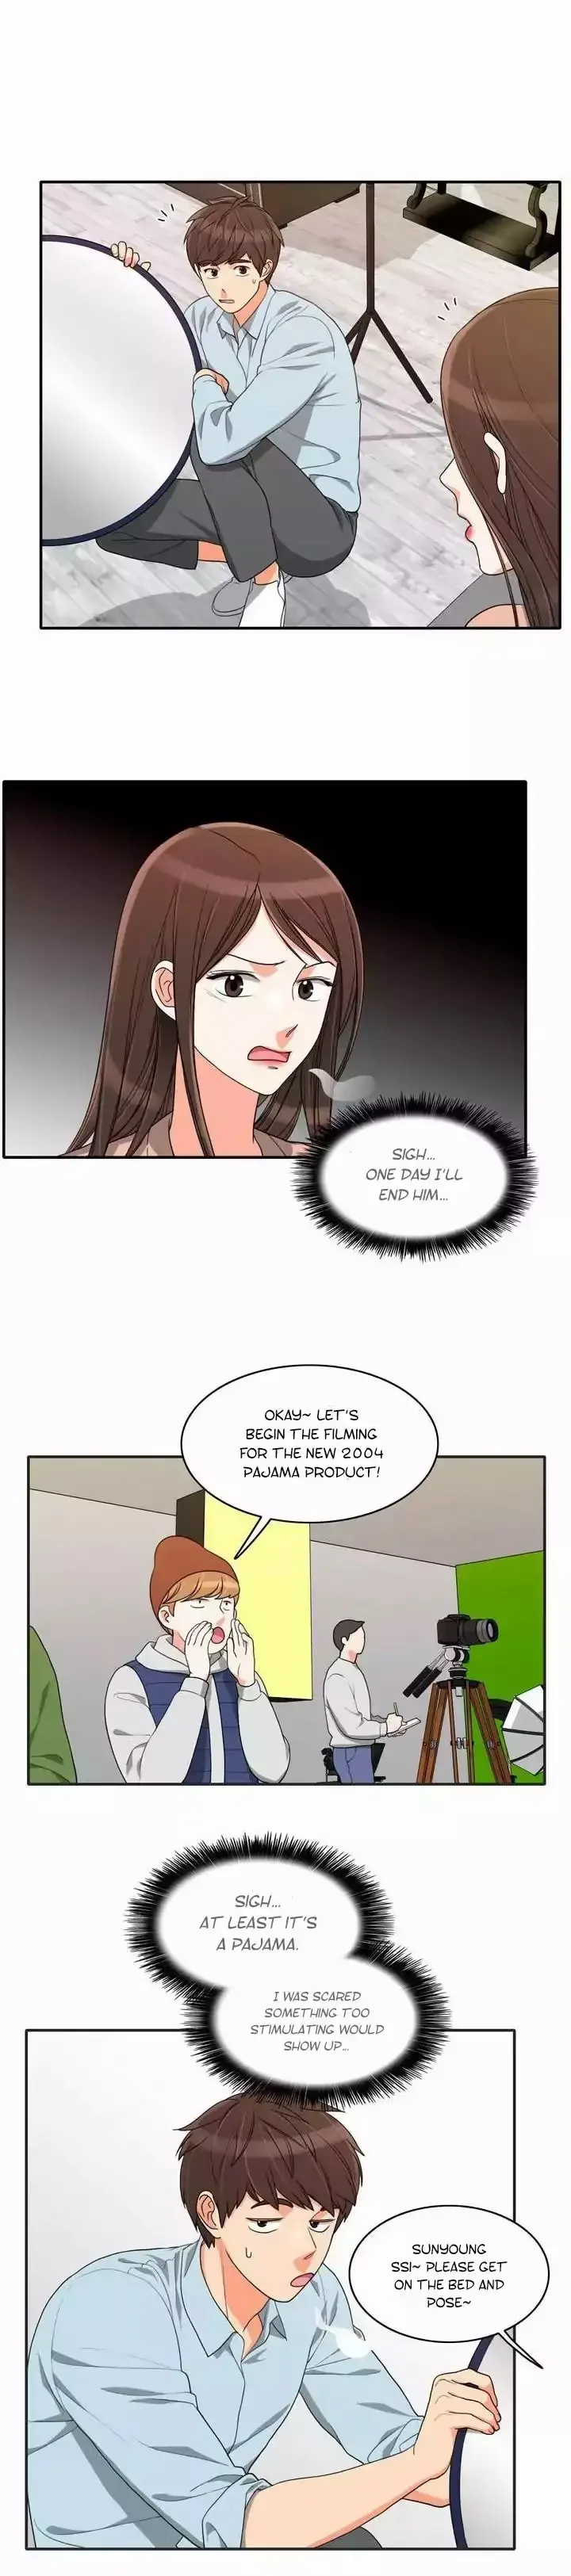 do-it-one-more-time-chap-46-12